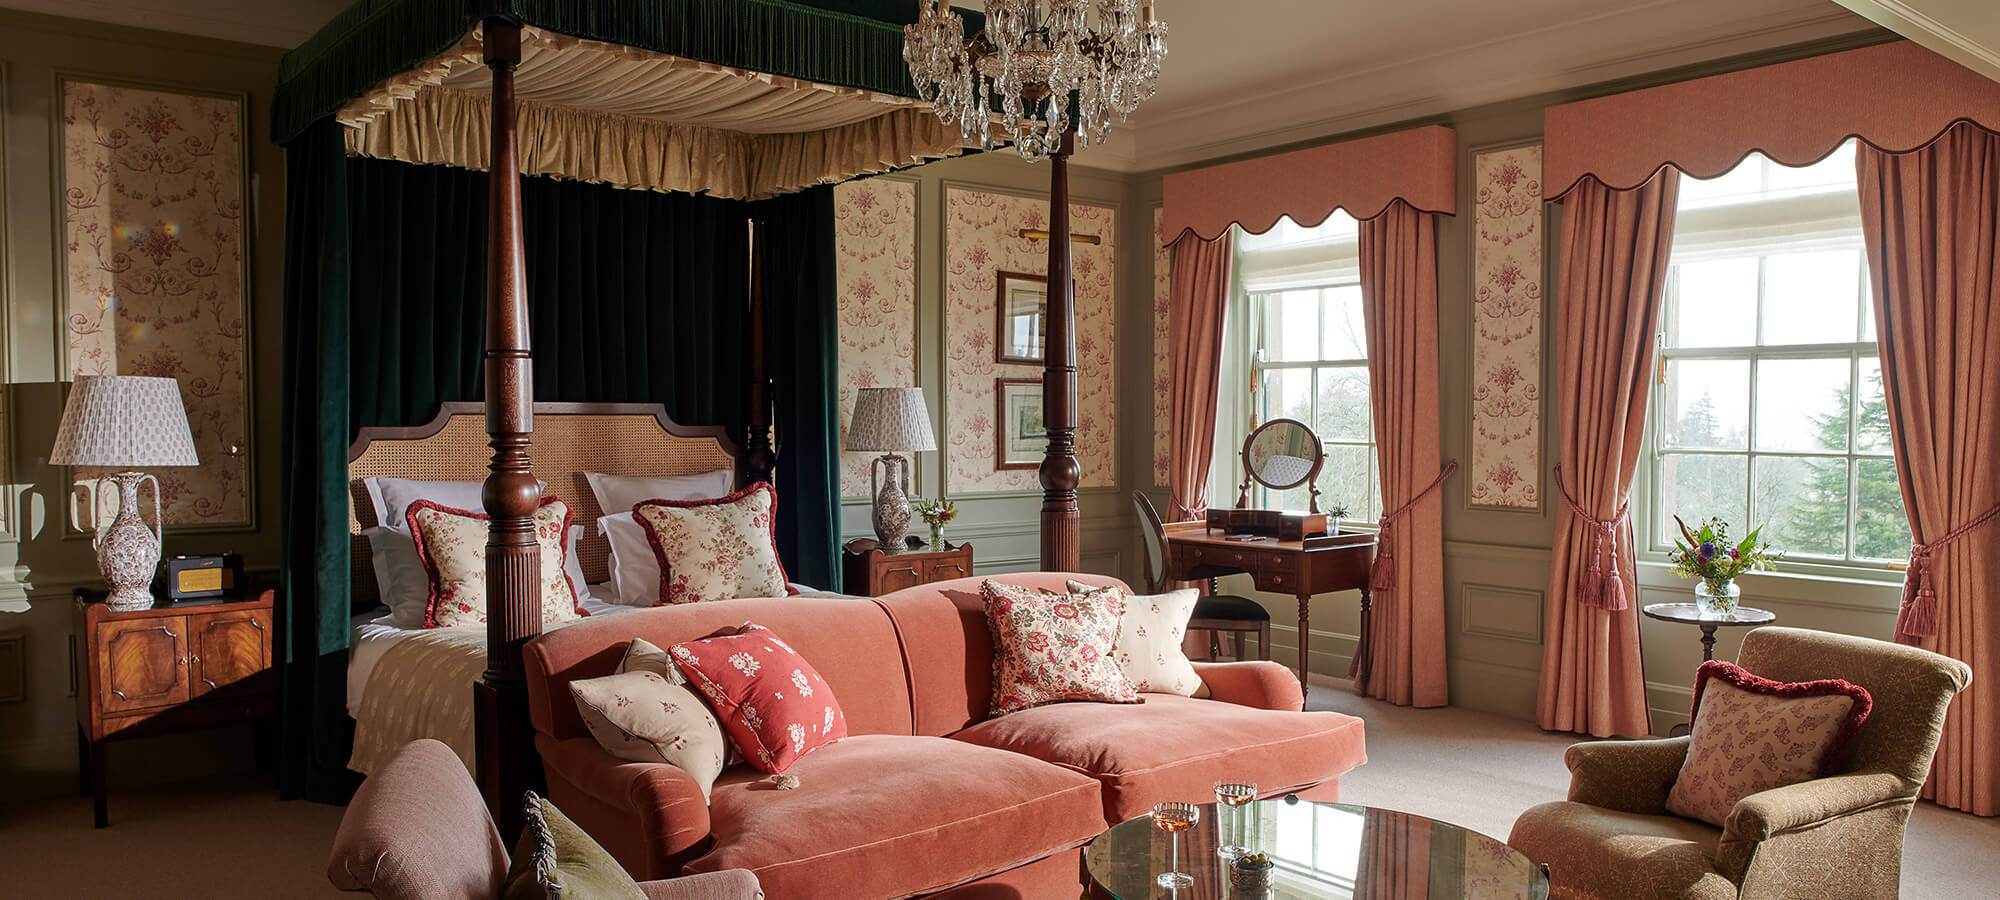 A large four poster bed, red velvet sofa, multiple tables and chairs sit in a the Royal Lochnagar Suite